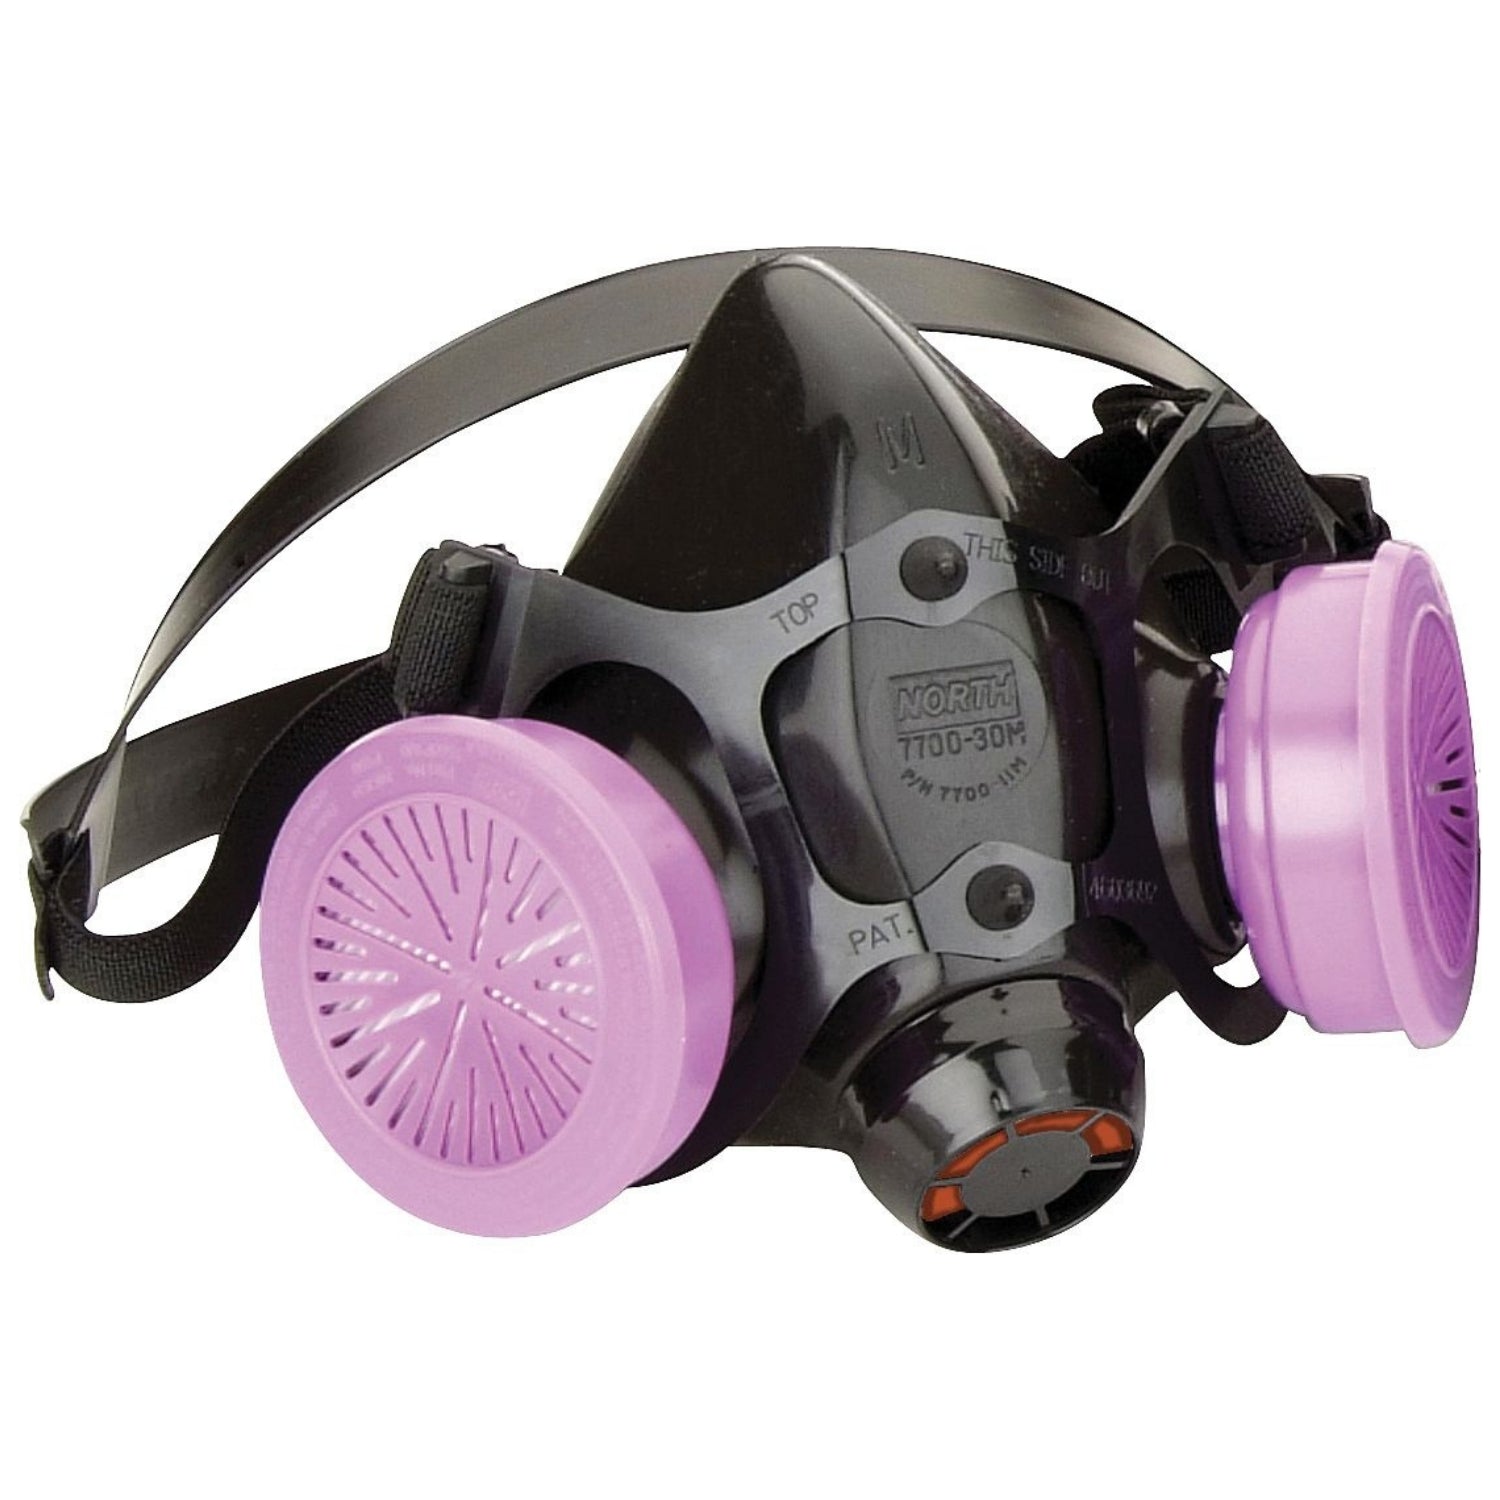 HONEYWELL  7700 Series Half Mask Respirator - Resists Particulates, Chemical, Contamination and Gas, Cradle Suspension, Silicone - Size Large